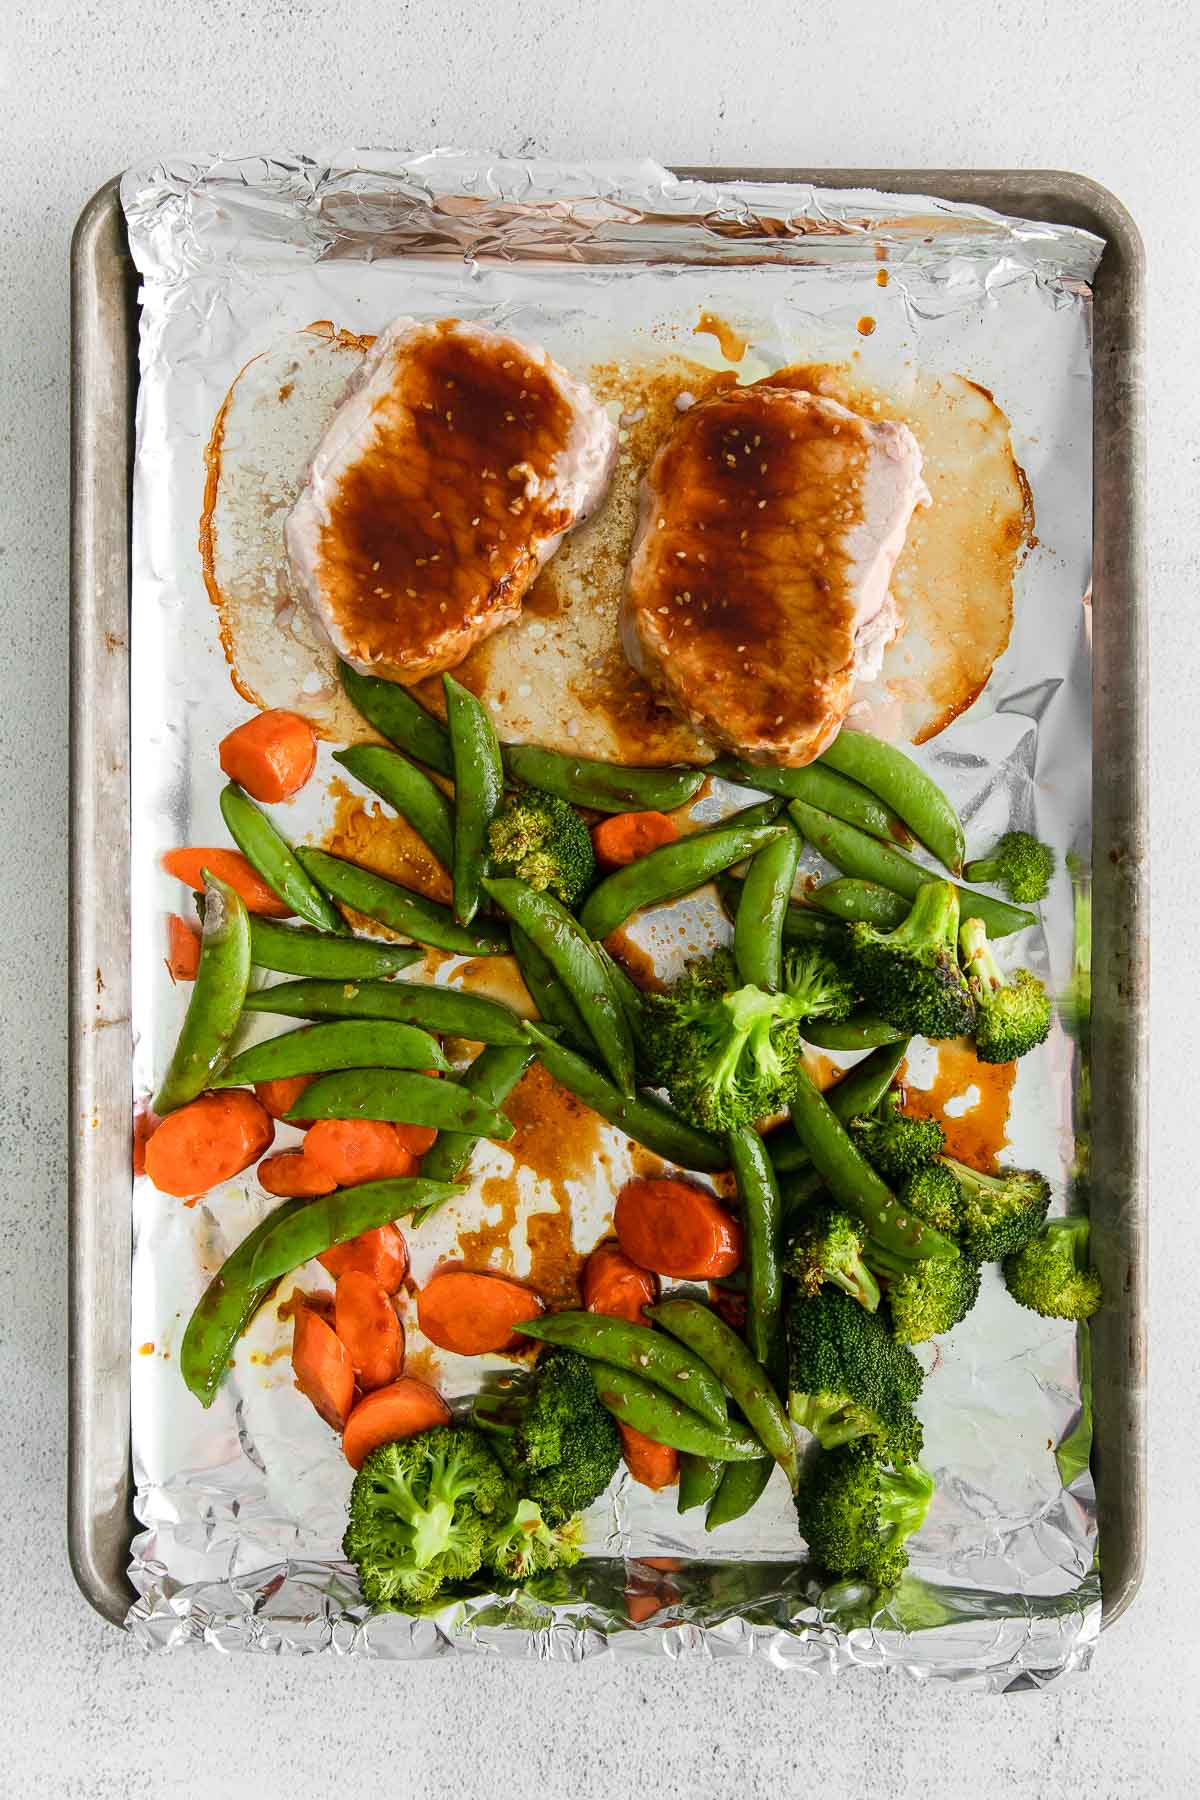 baking sheet with 2 pork chops, carrots, broccoli and sugar snap peas topped with soy marinade